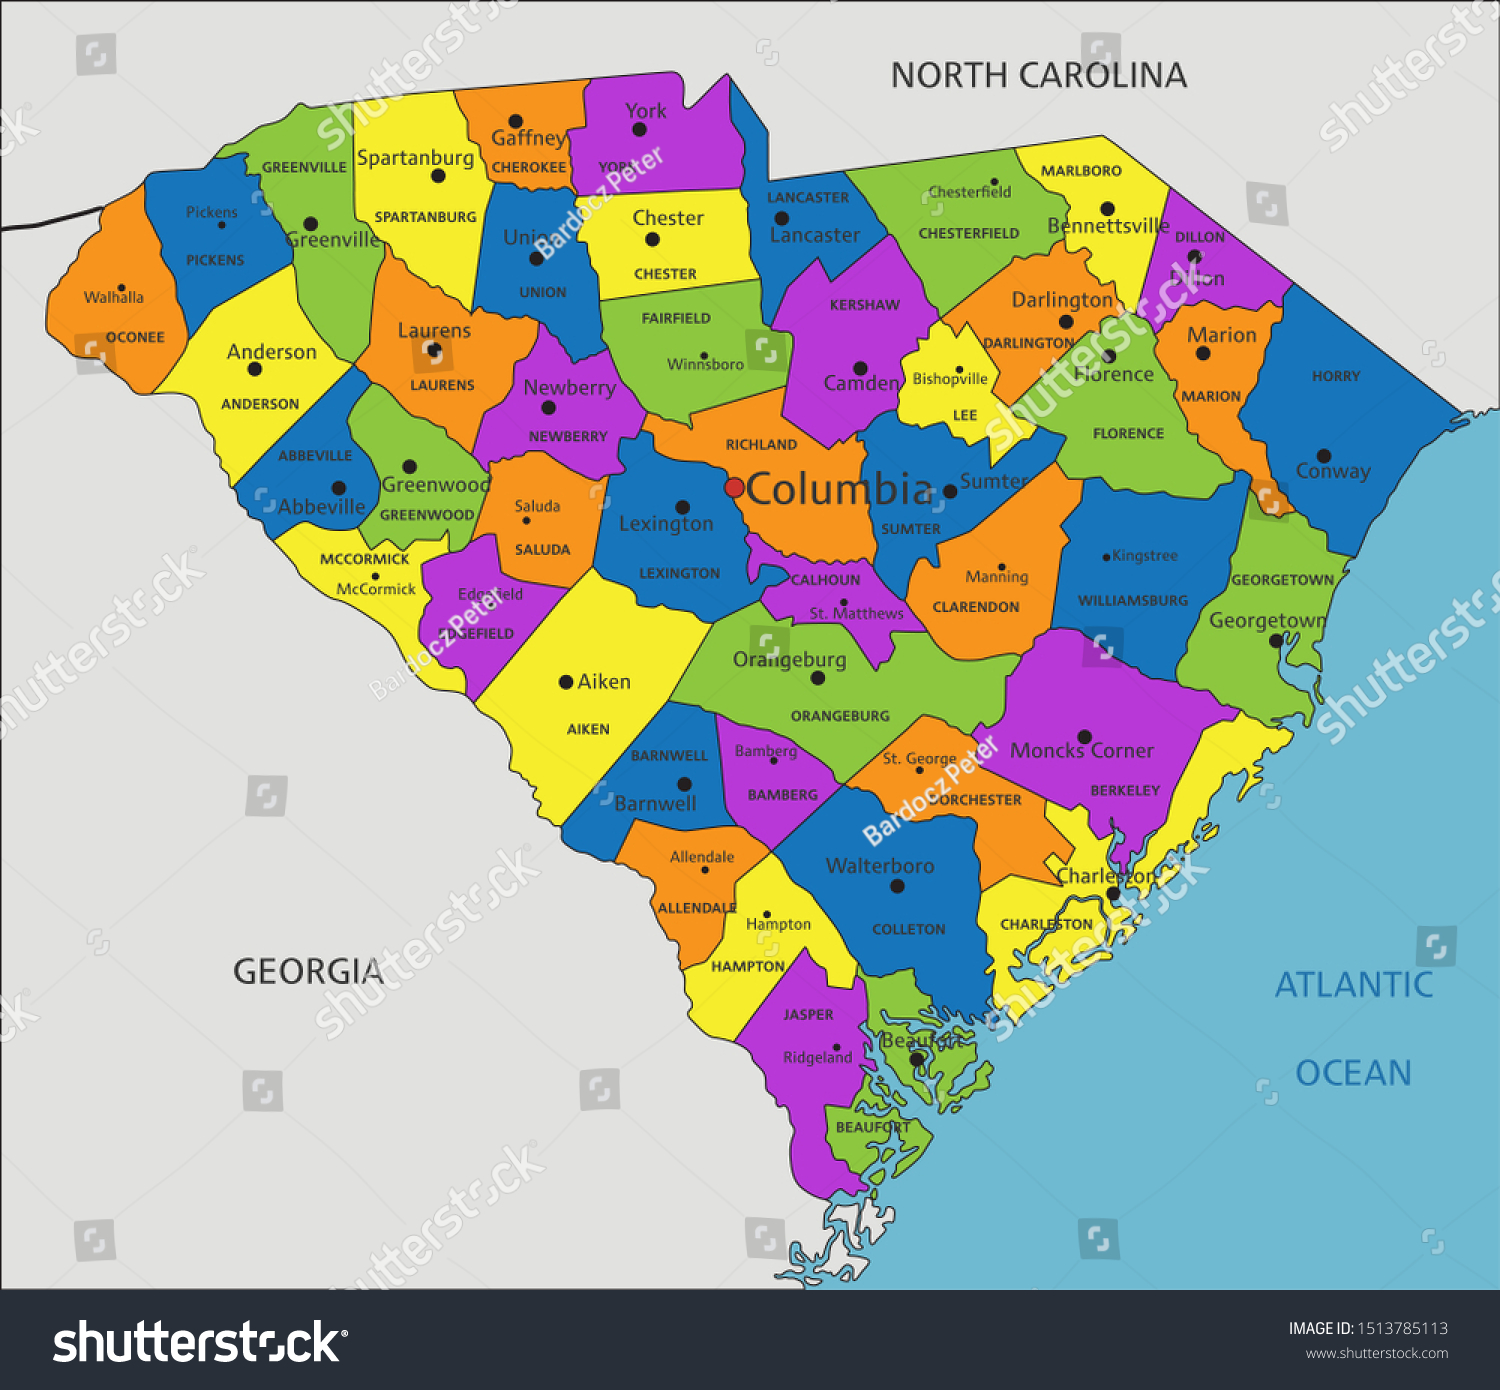 Colorful South Carolina Political Map Clearly Stock Vector Royalty Free 1513785113 Shutterstock 6922